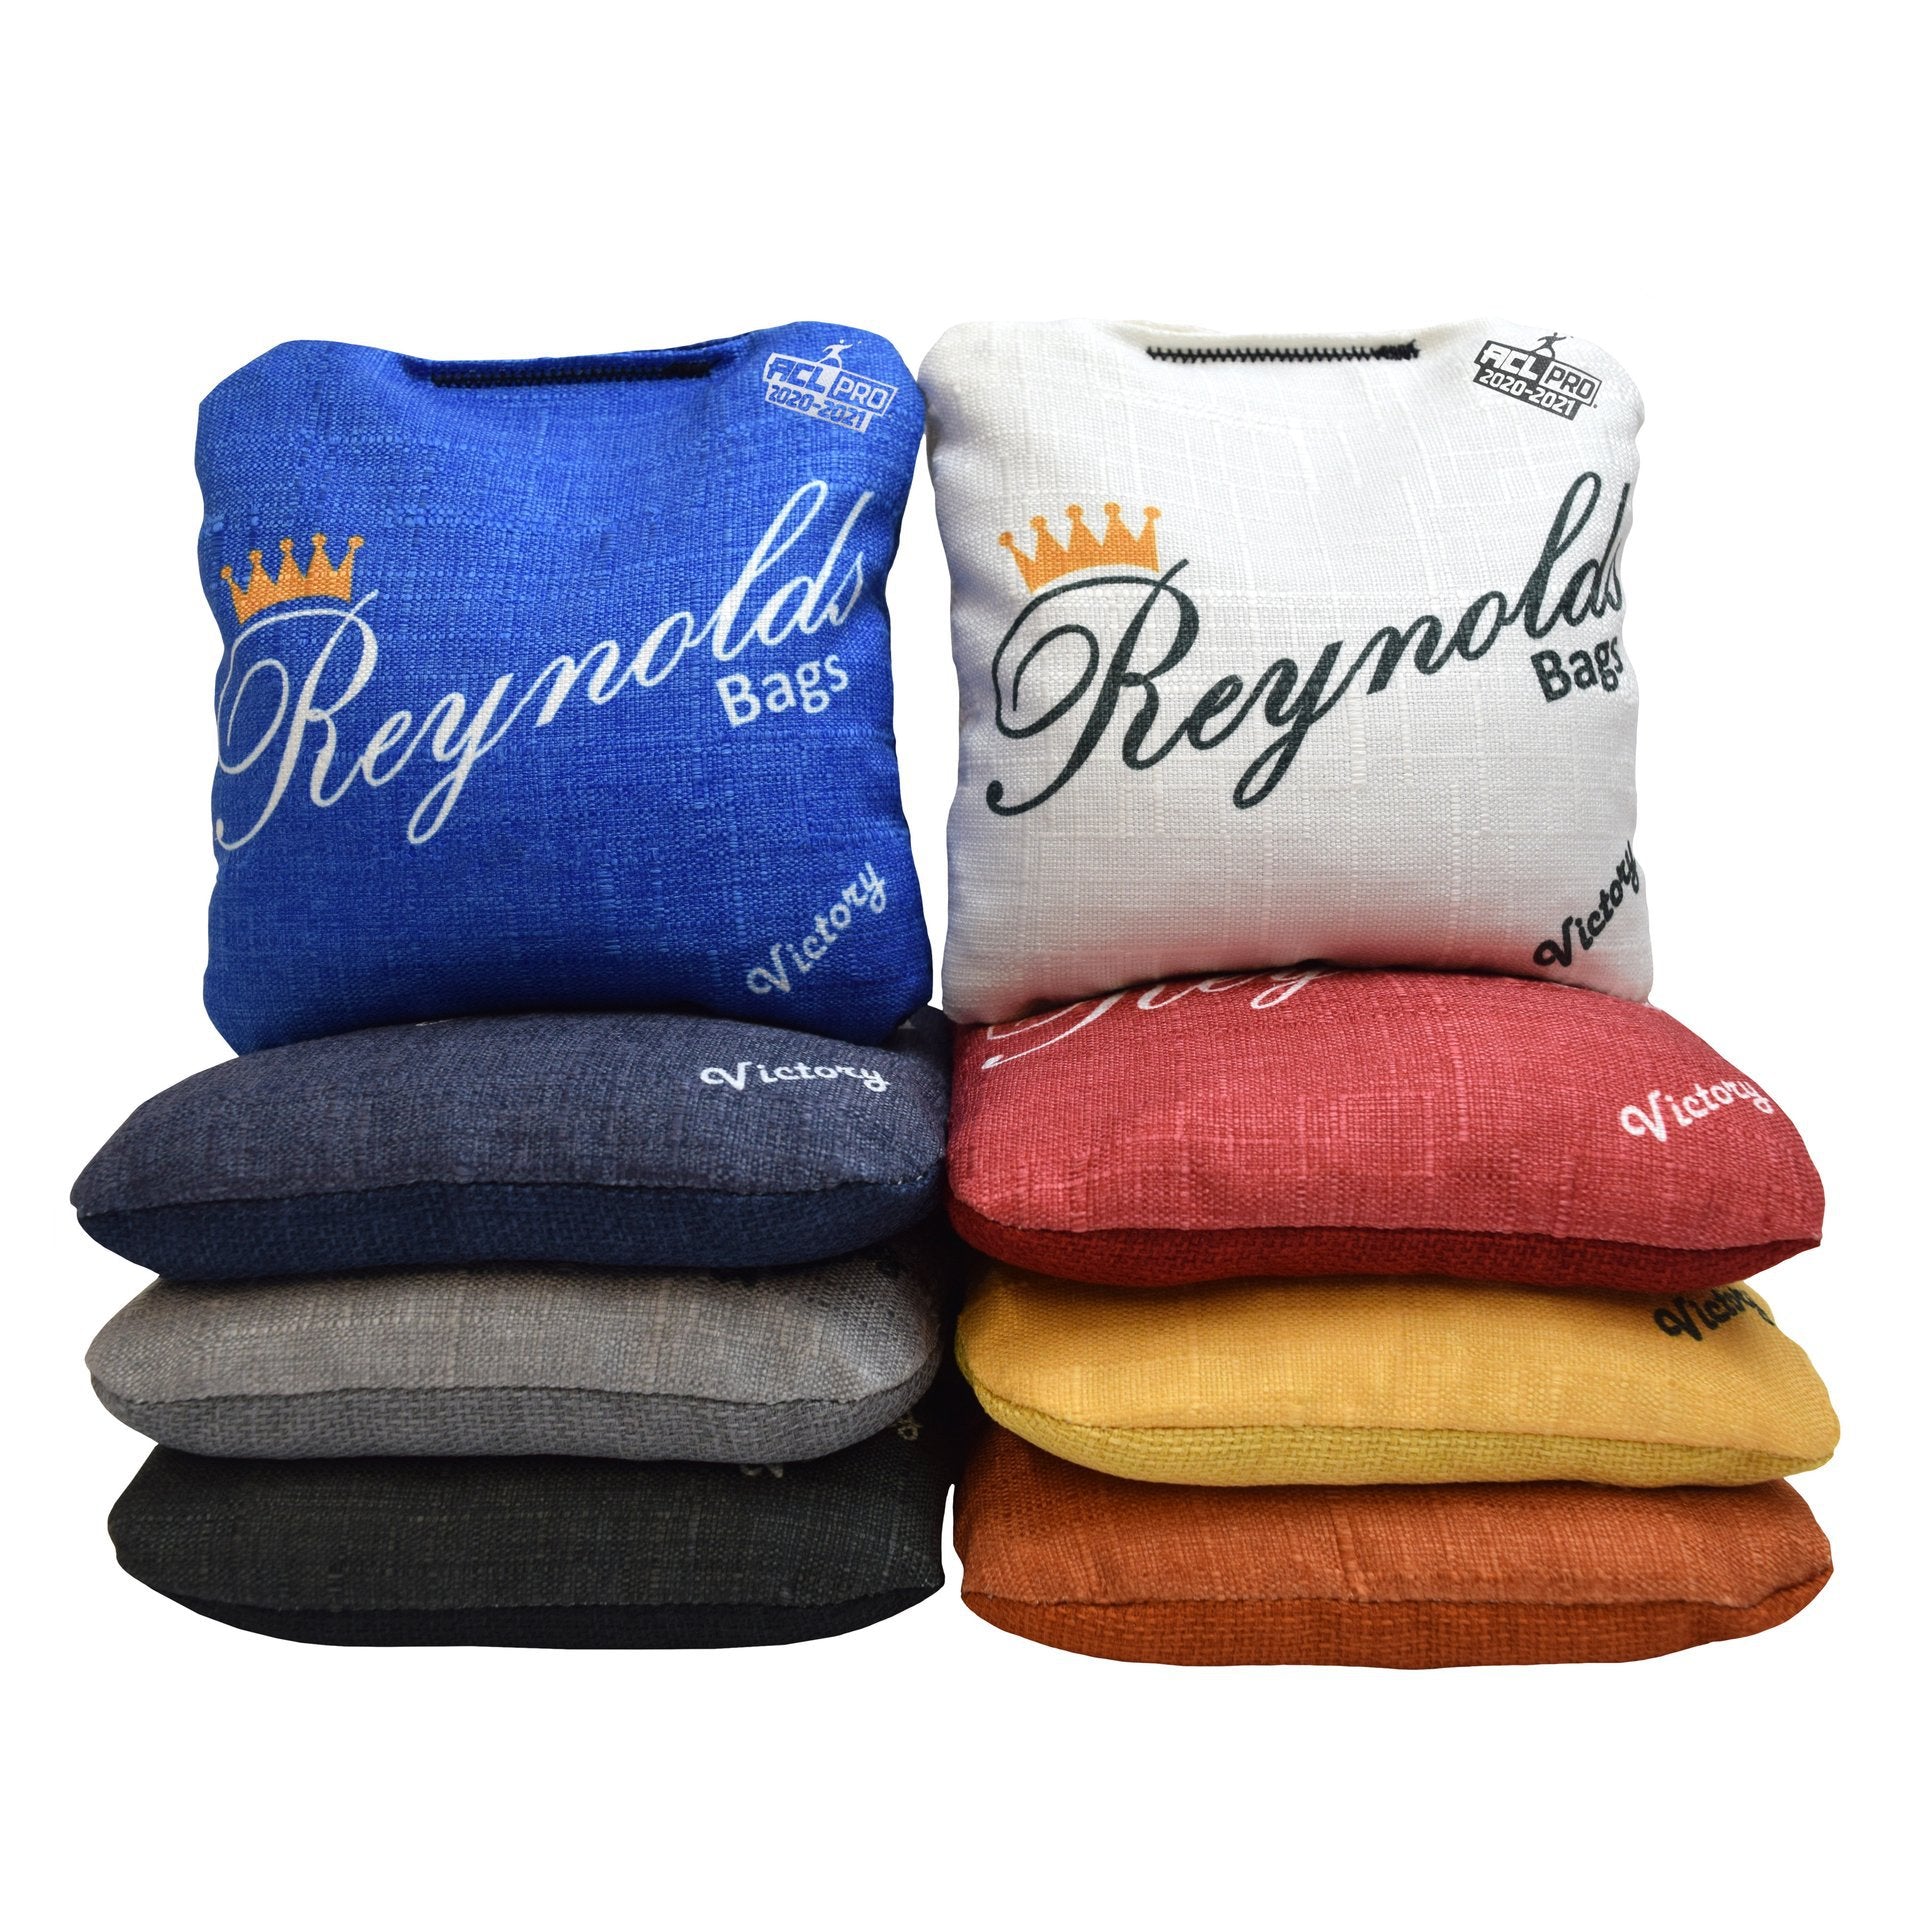 reynolds acl bags